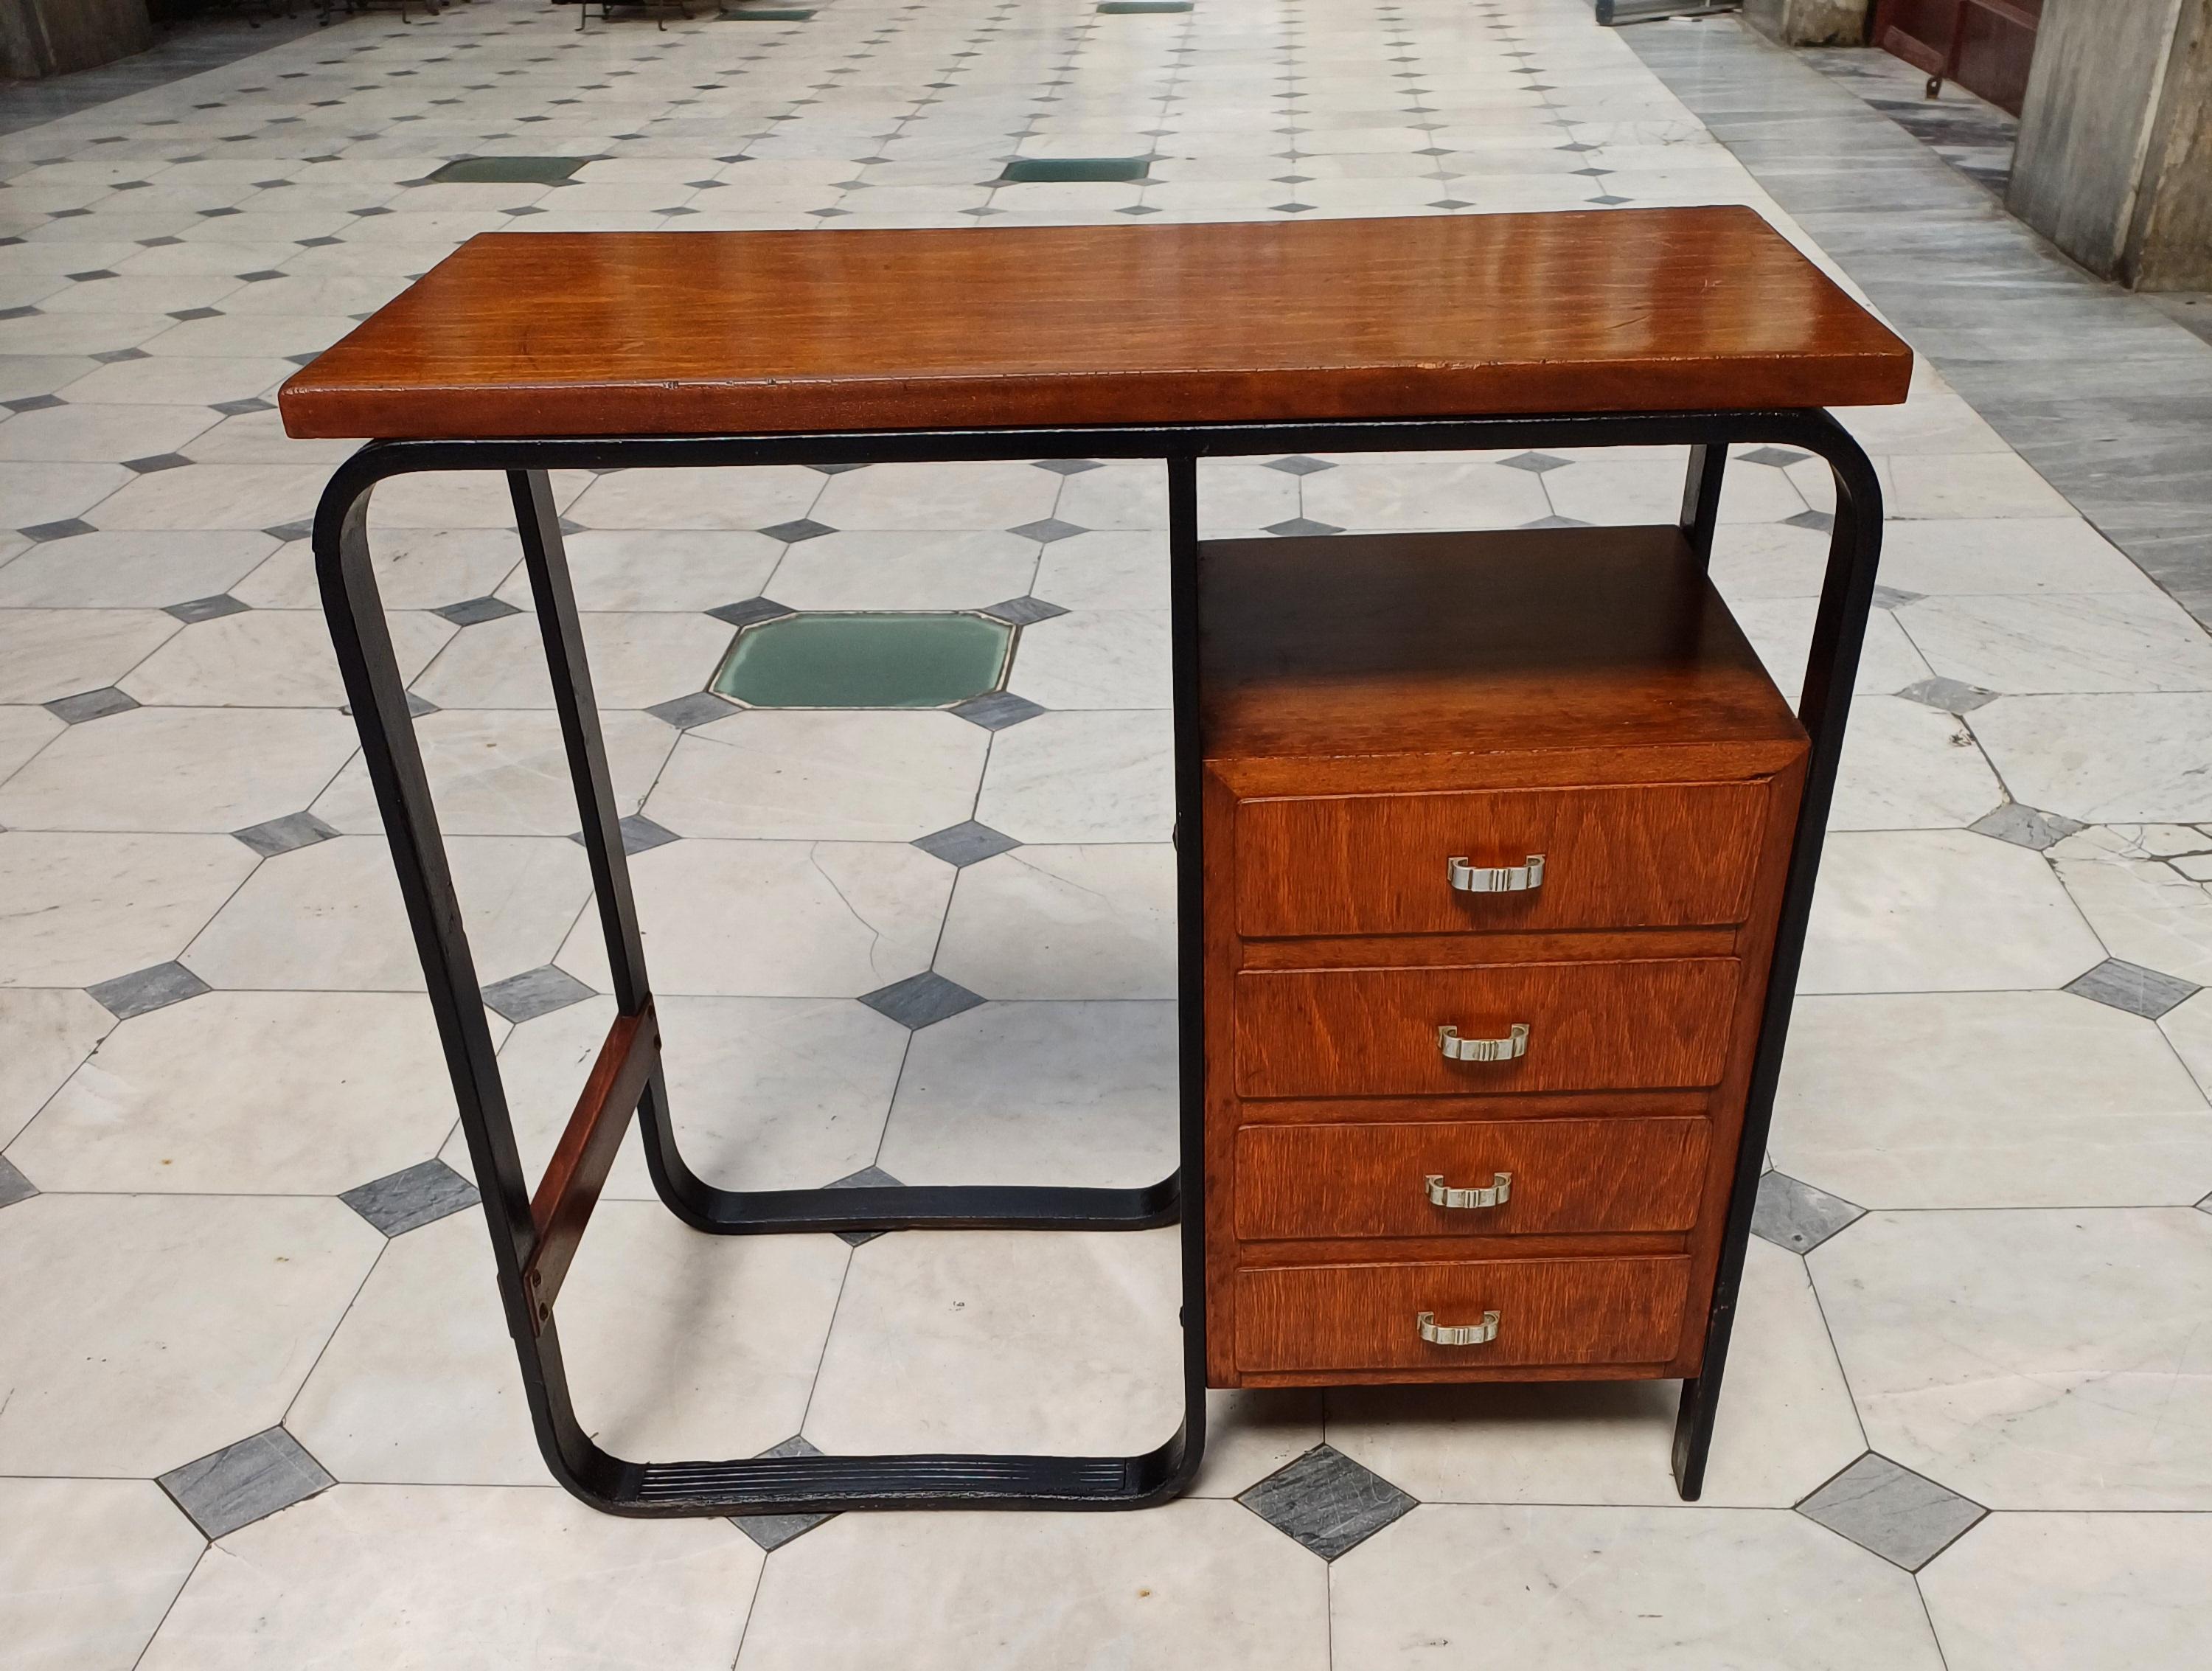 Small wood and metal desk designed by Giuseppe Pagano Giuseppe Pagano Pogatschnig in 1940s Italy. Small desk made of curved laminated wood with 4 drawers.
Signs of wear and use.